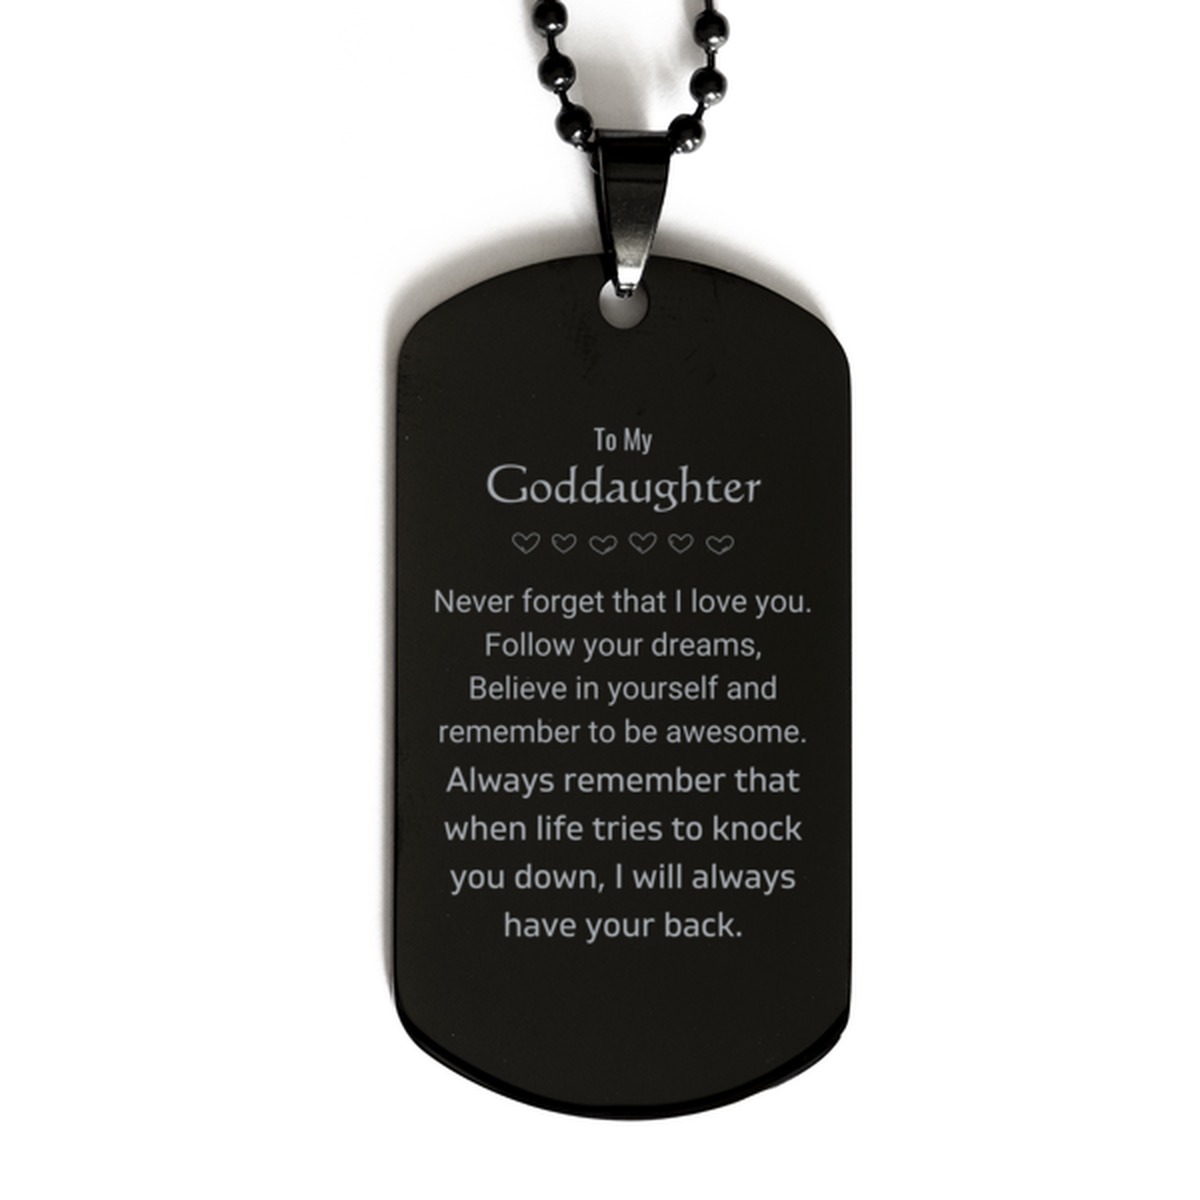 Inspirational Gifts for Goddaughter, Follow your dreams, Believe in yourself, Goddaughter Black Dog Tag, Birthday Christmas Unique Gifts For Goddaughter